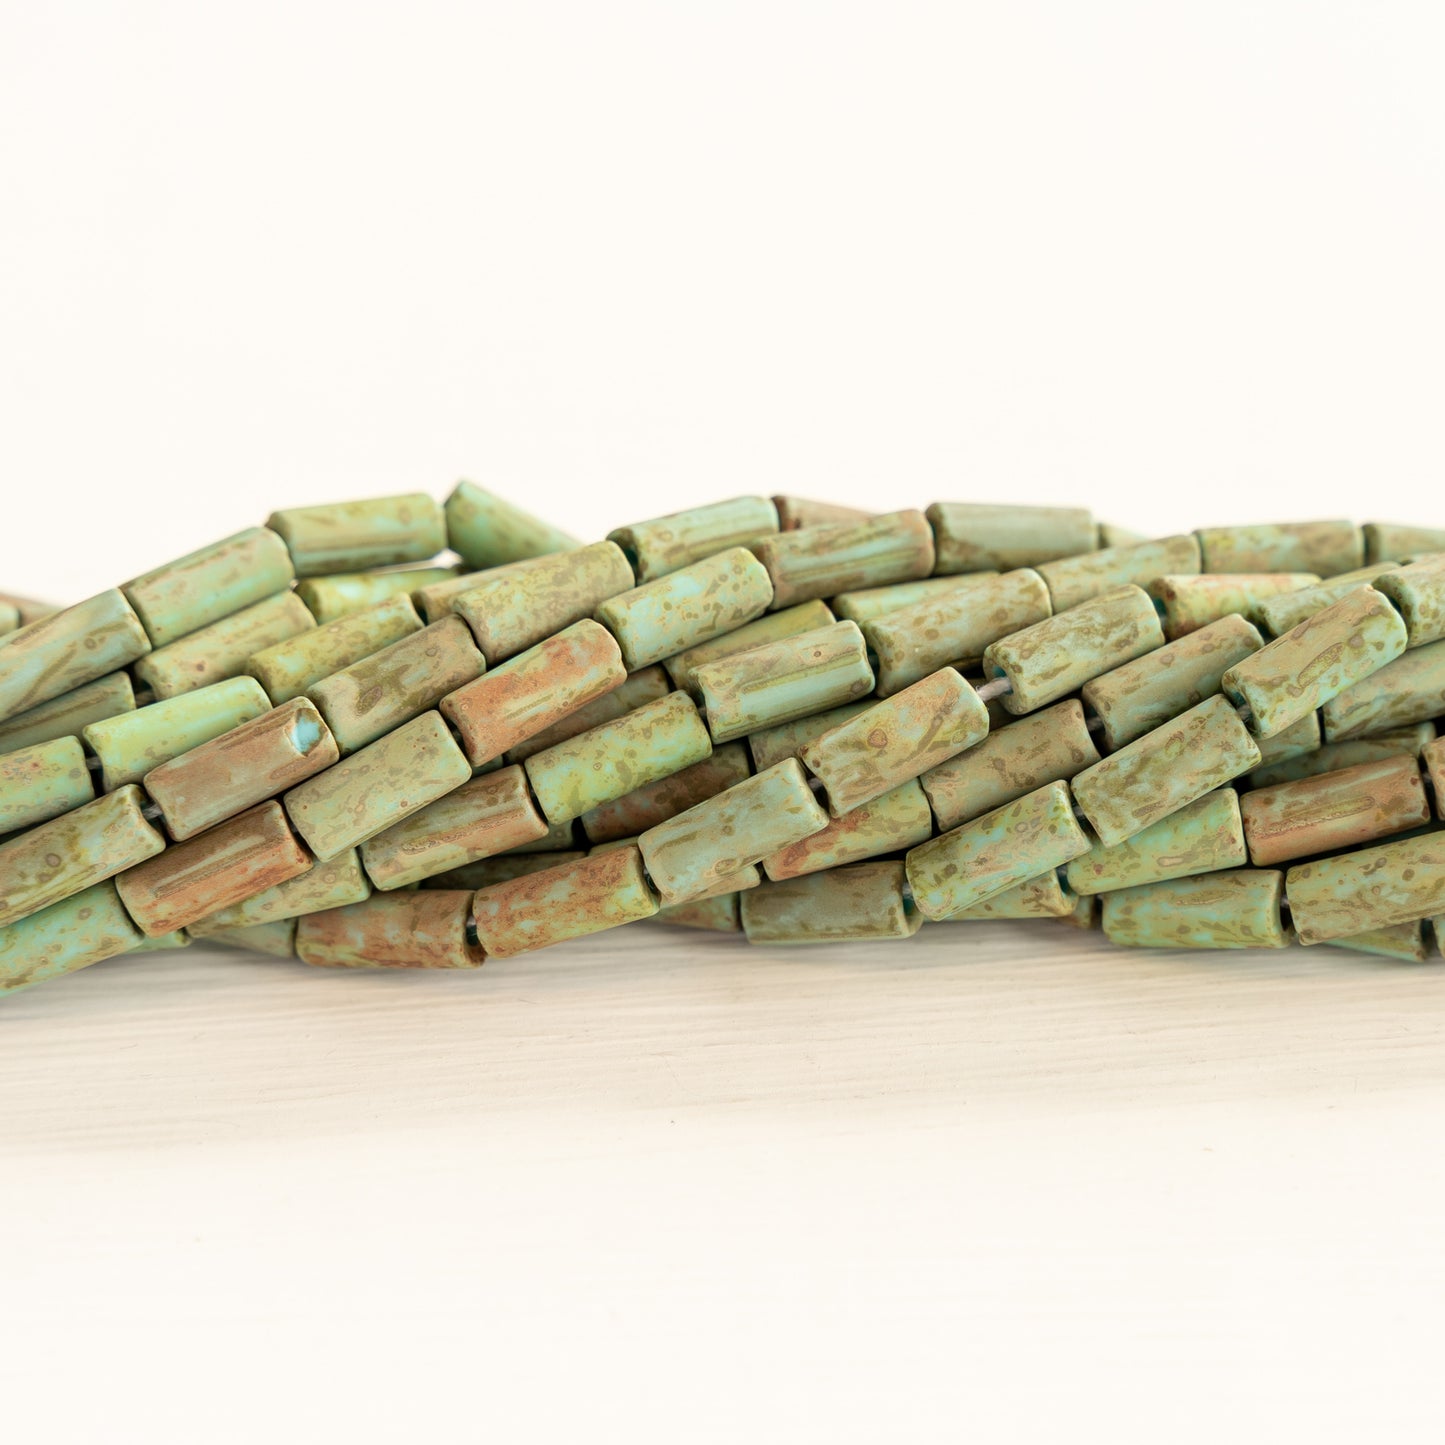 9x4mm Glass Tube Beads - Matte Green Turquoise Picasso - 20 or 60 Inches